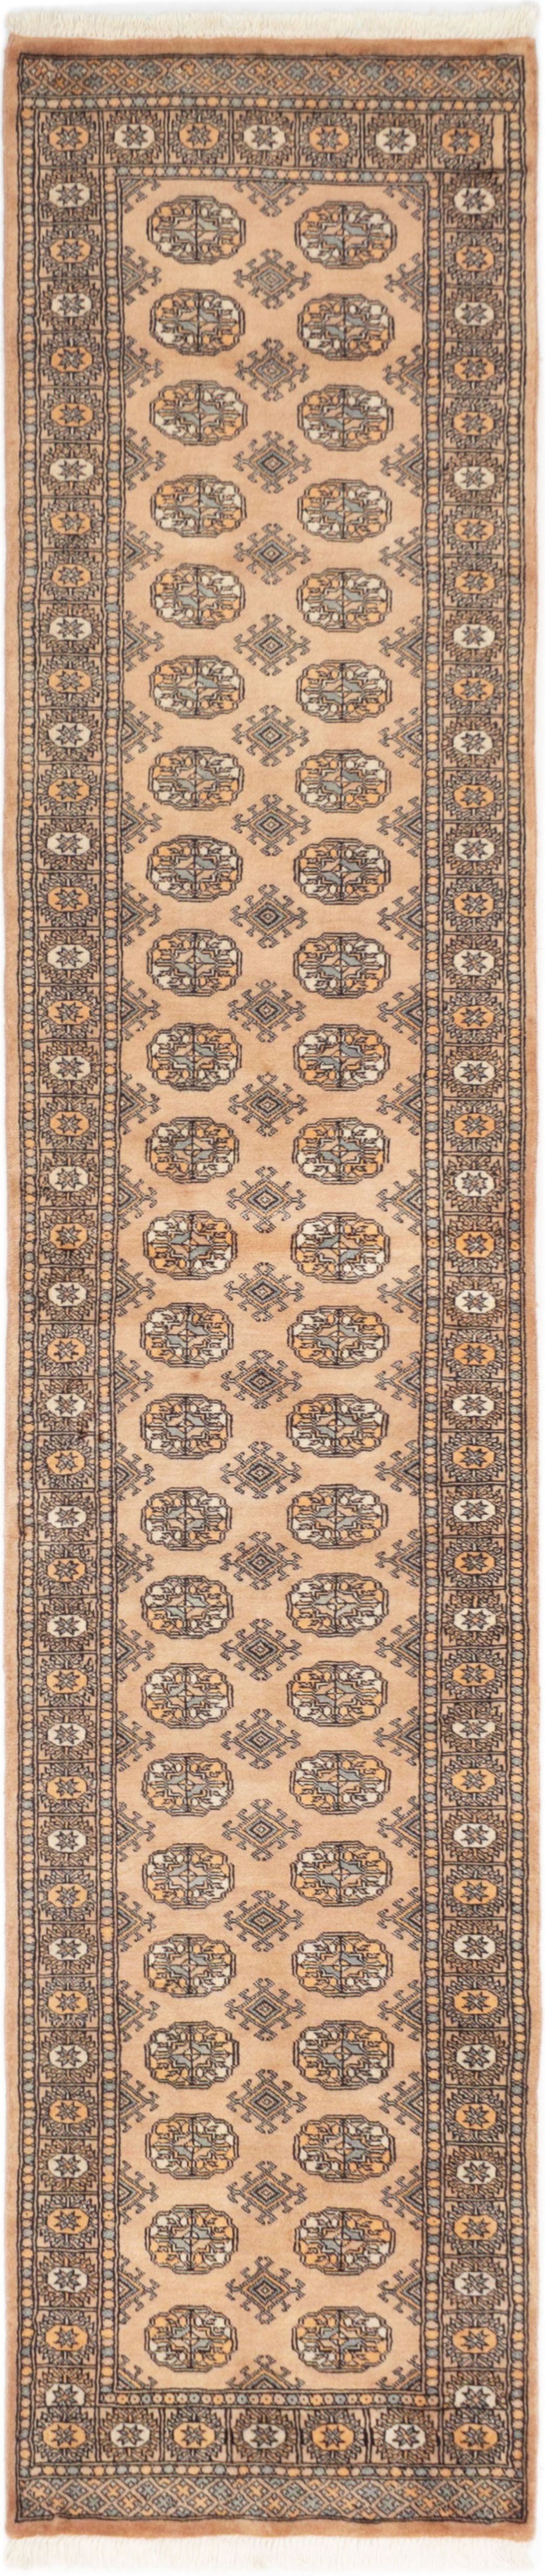 Hand-knotted Finest Peshawar Bokhara Tan Wool Rug 2'8" x 12'4" Size: 2'8" x 12'4"  